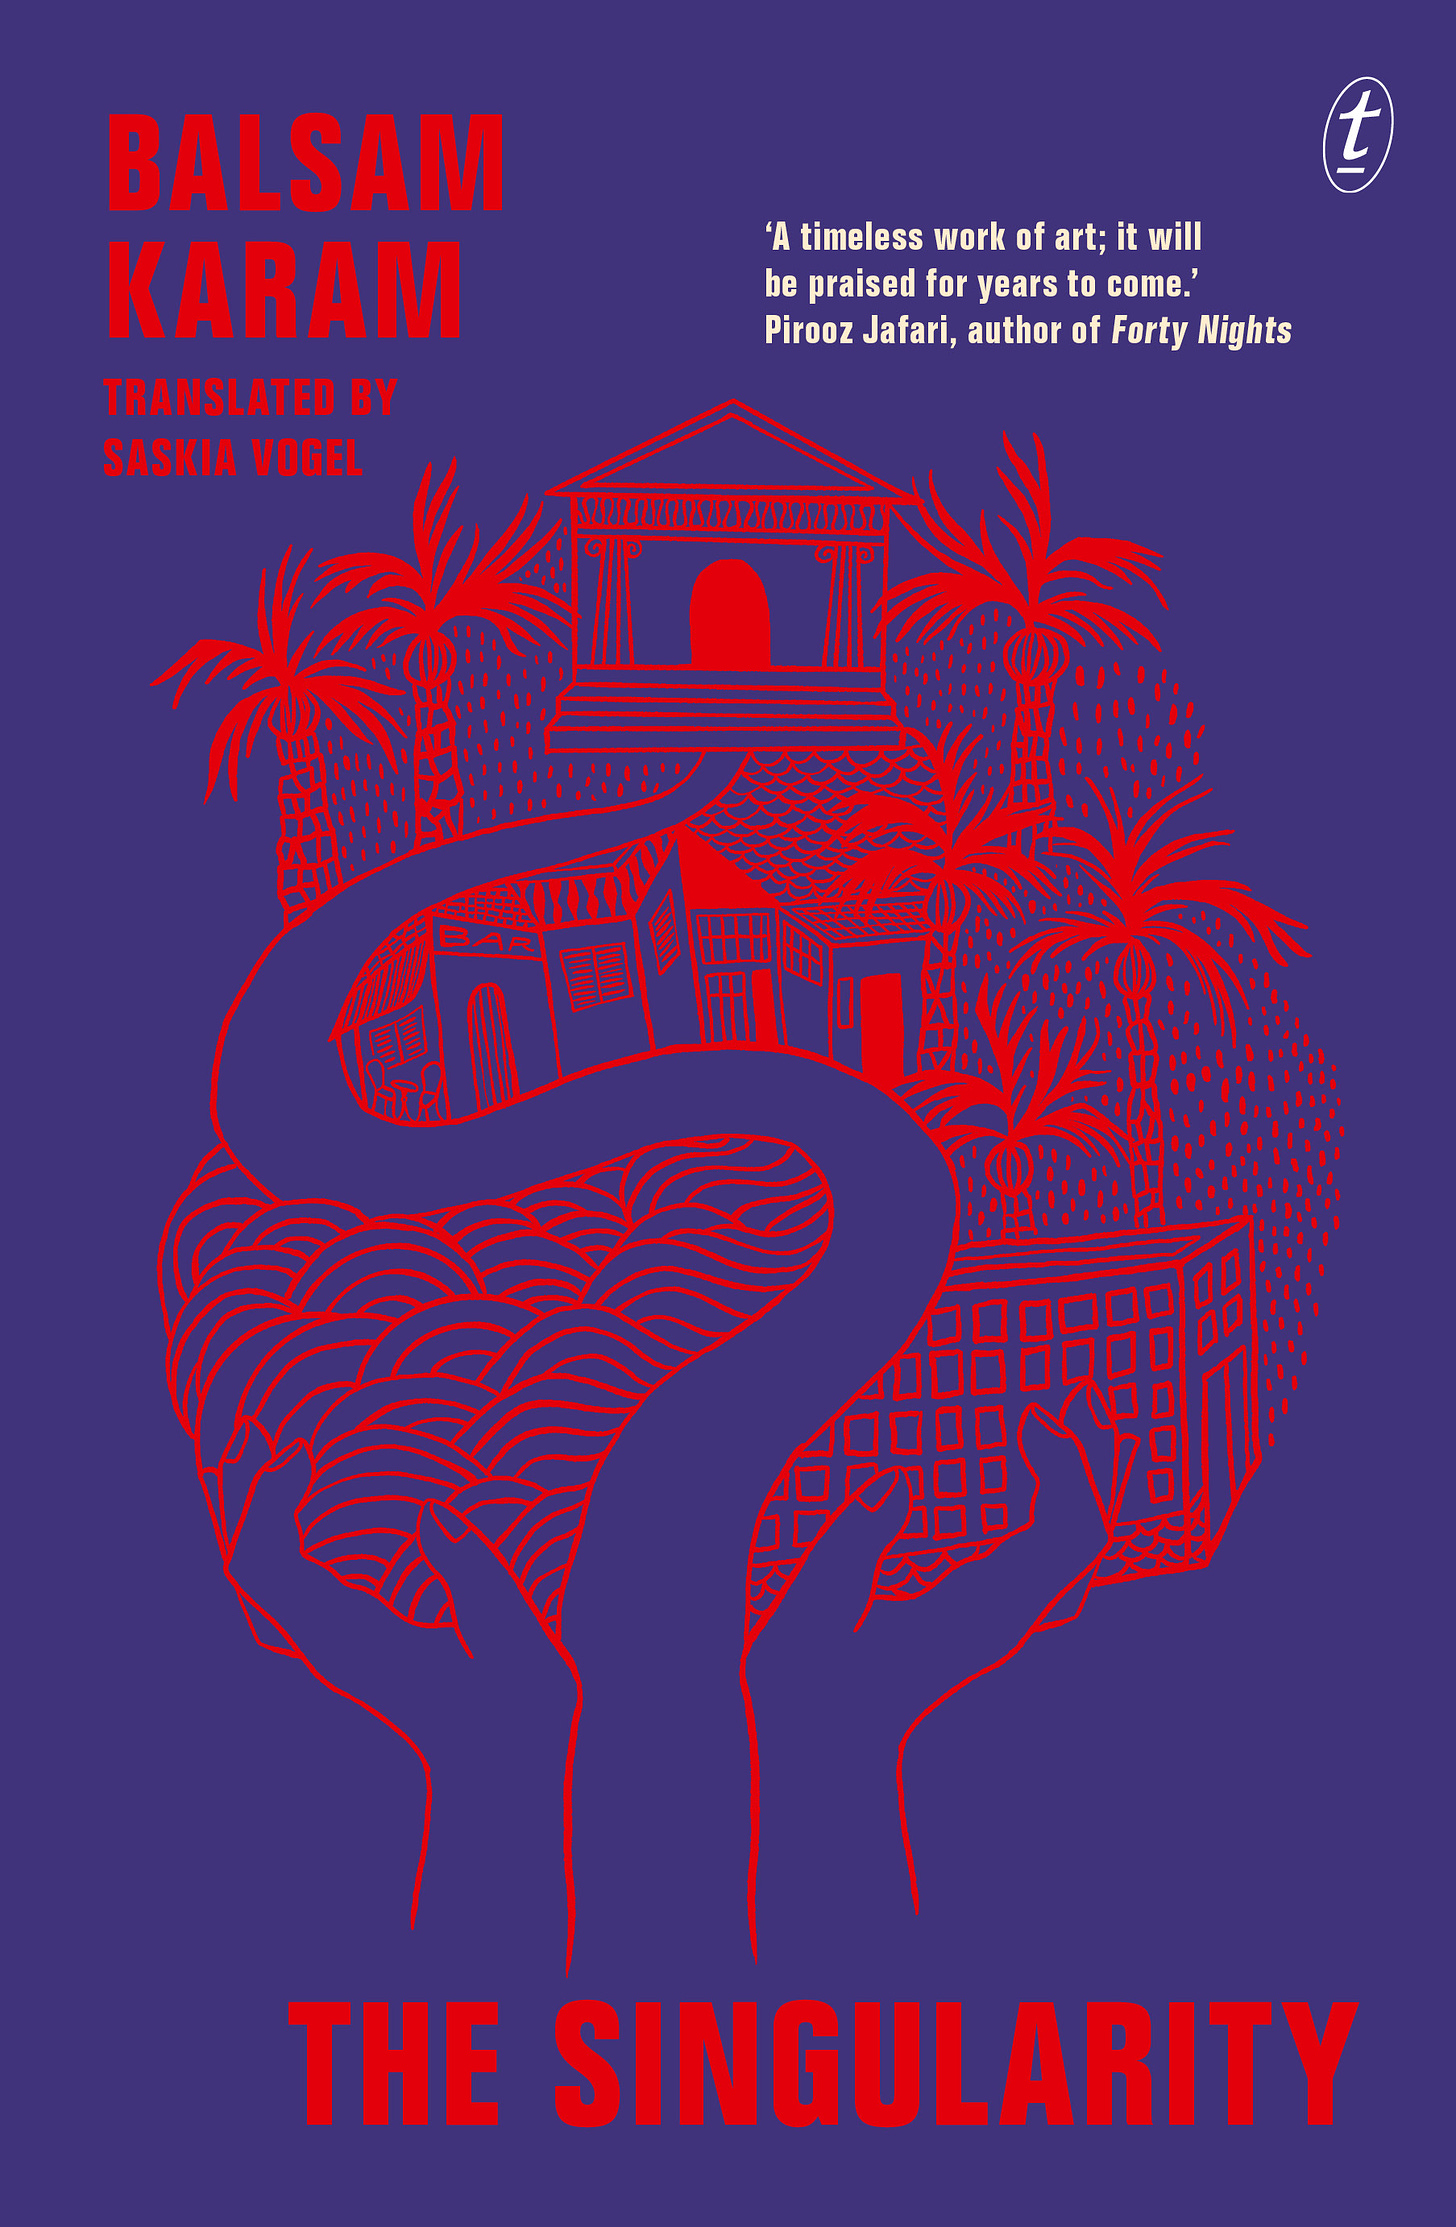 The cover of Balsam Karam's book 'The Singularity' Purple background with a red line illustration  of buildings and palm trees in a sea side town